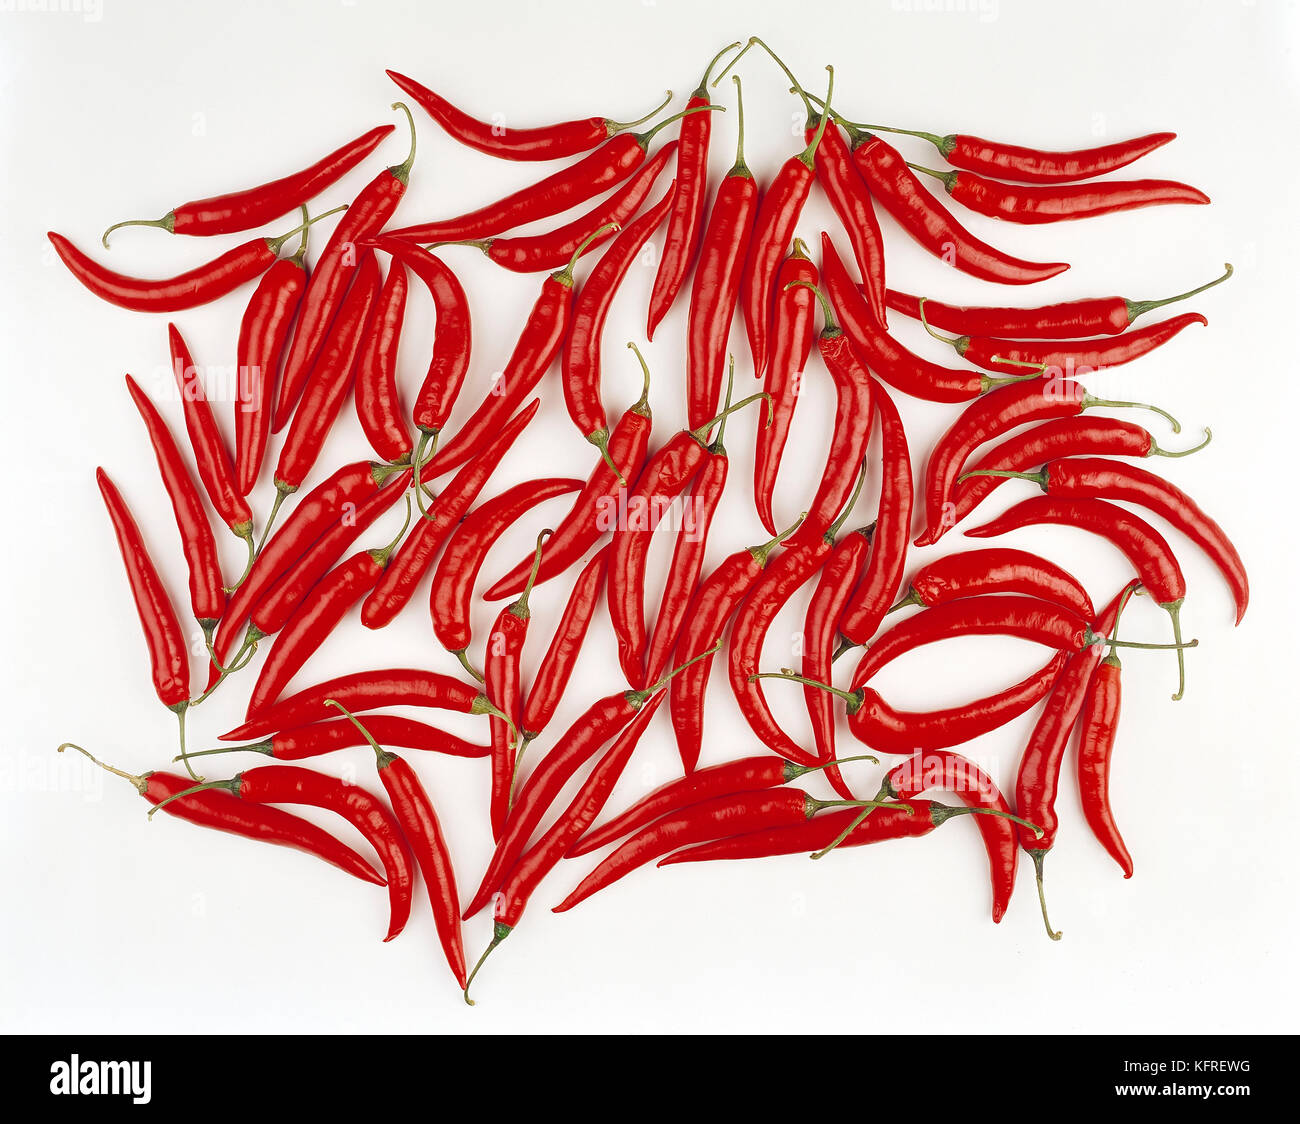 Still life. Food. Close up of scattered red chilli peppers. Stock Photo